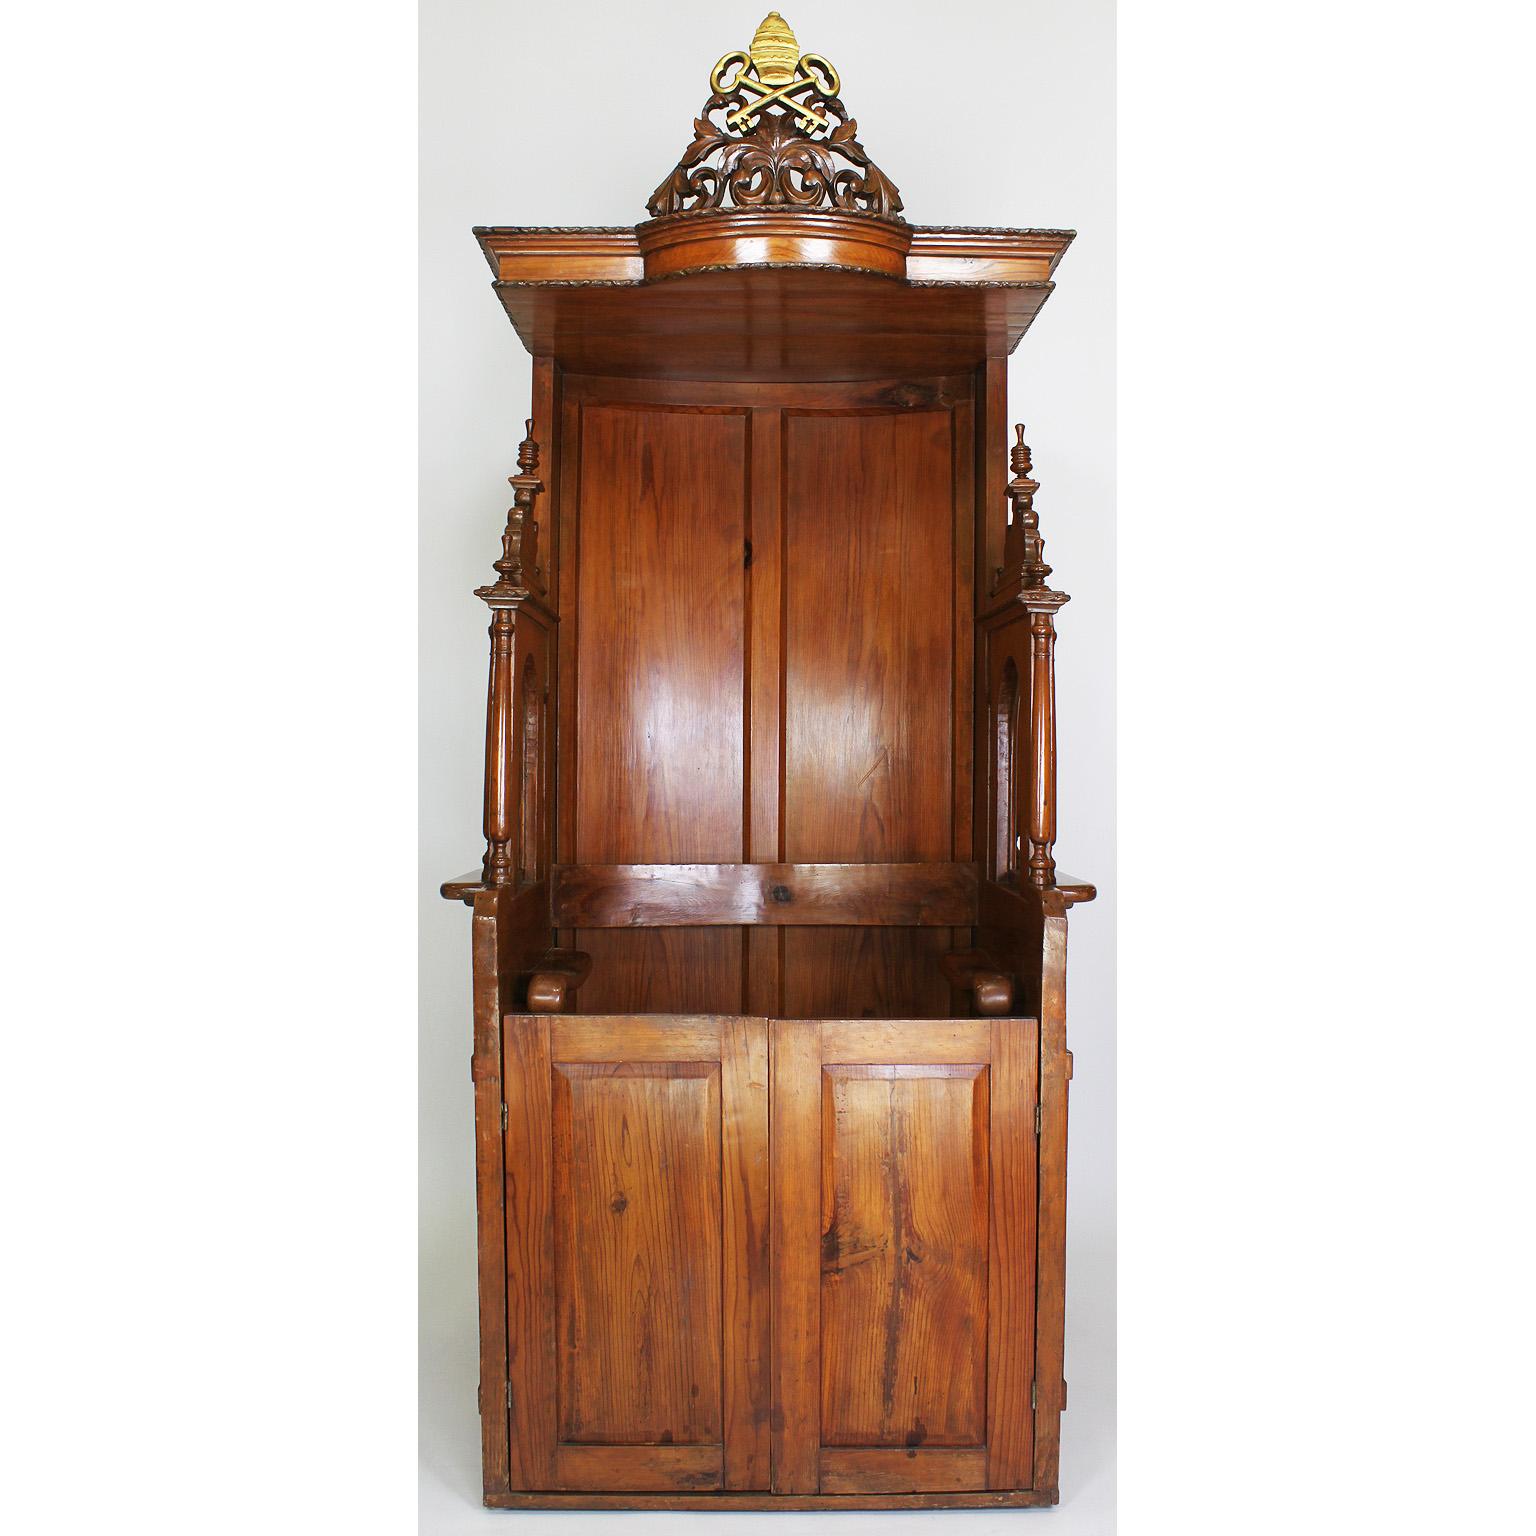 A rare Italian 19th century carved pine Catholic Church confessional stall, booth. The Baroque revival body crowned with a carved and parcel gilt Papal insignia, the official decoration for the Pope in his capacity as the head of the Roman Catholic